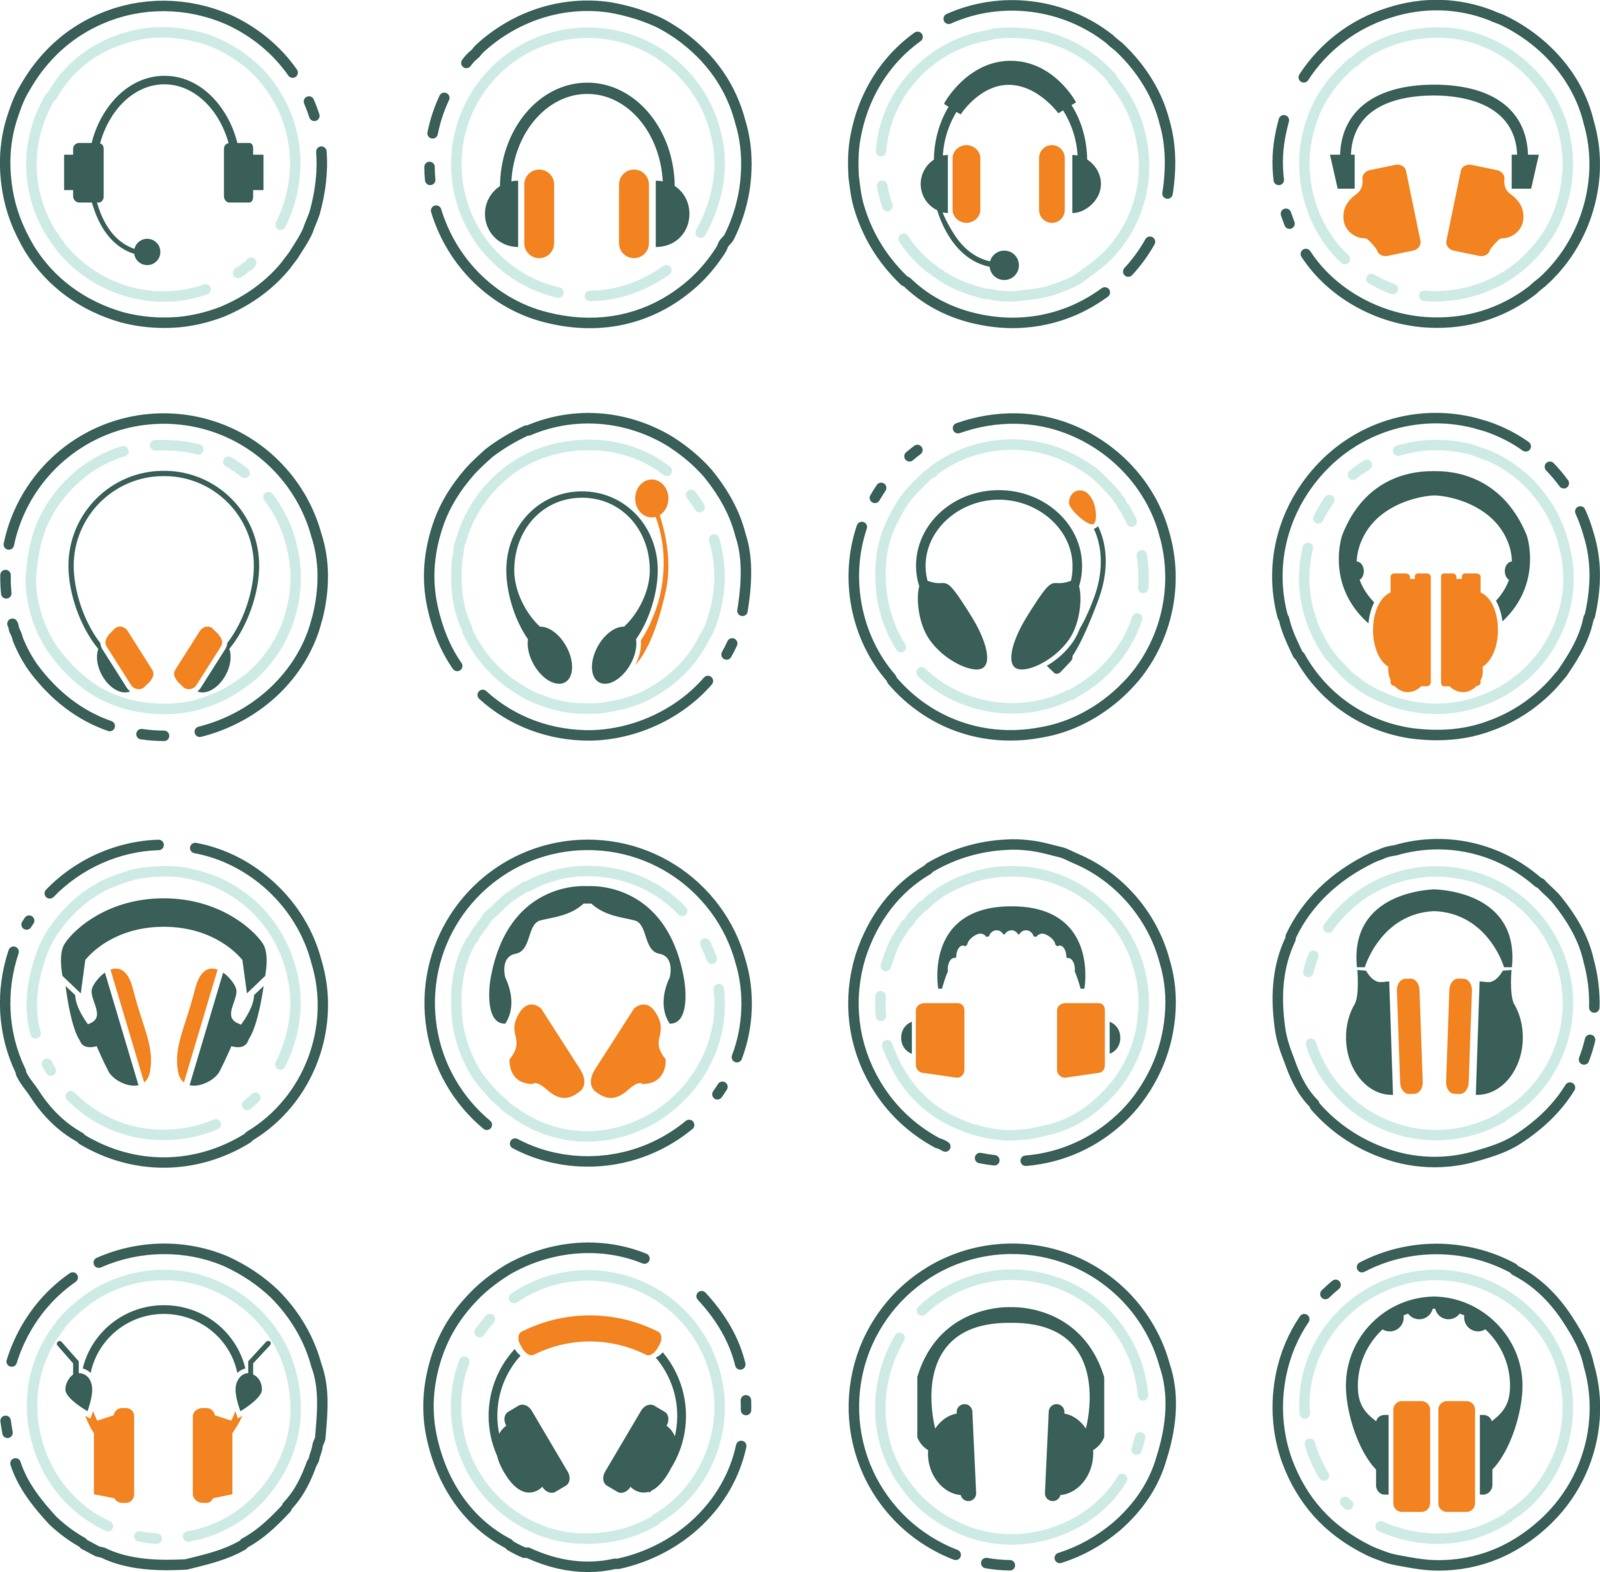 Headphones icon set for web sites and user interface